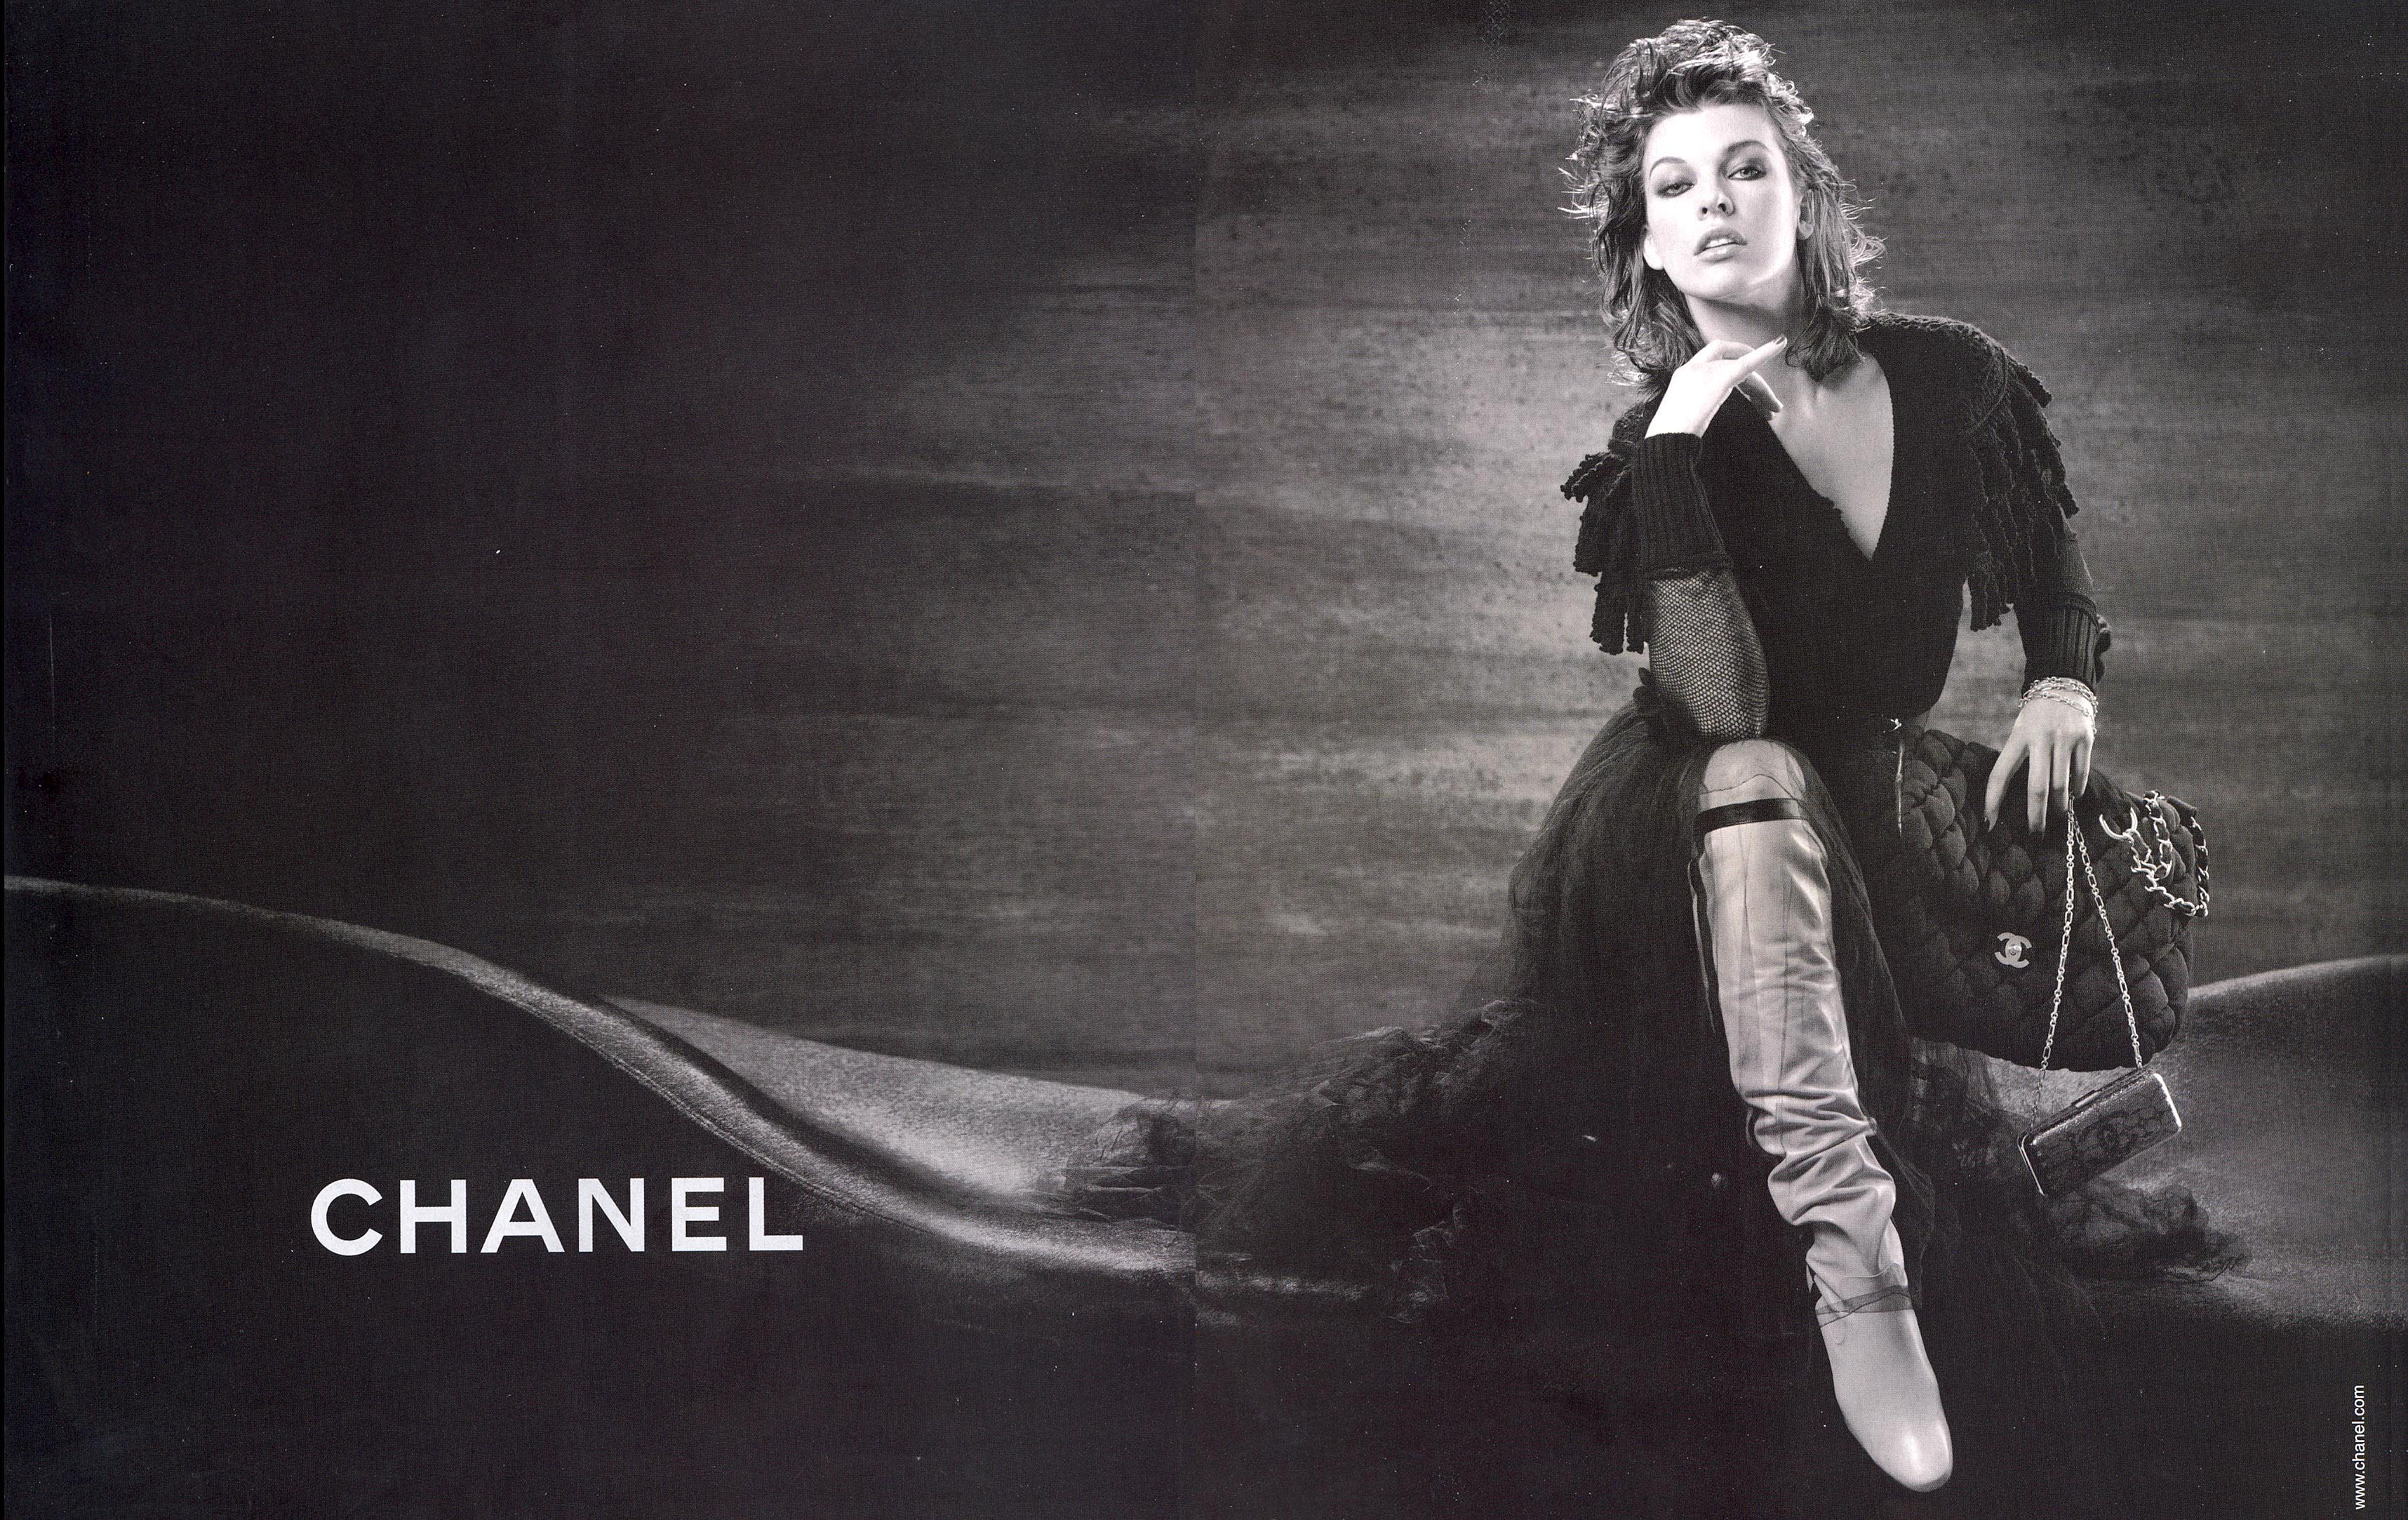  The Official Milla Jovovich Website :: Gallery - Chanel